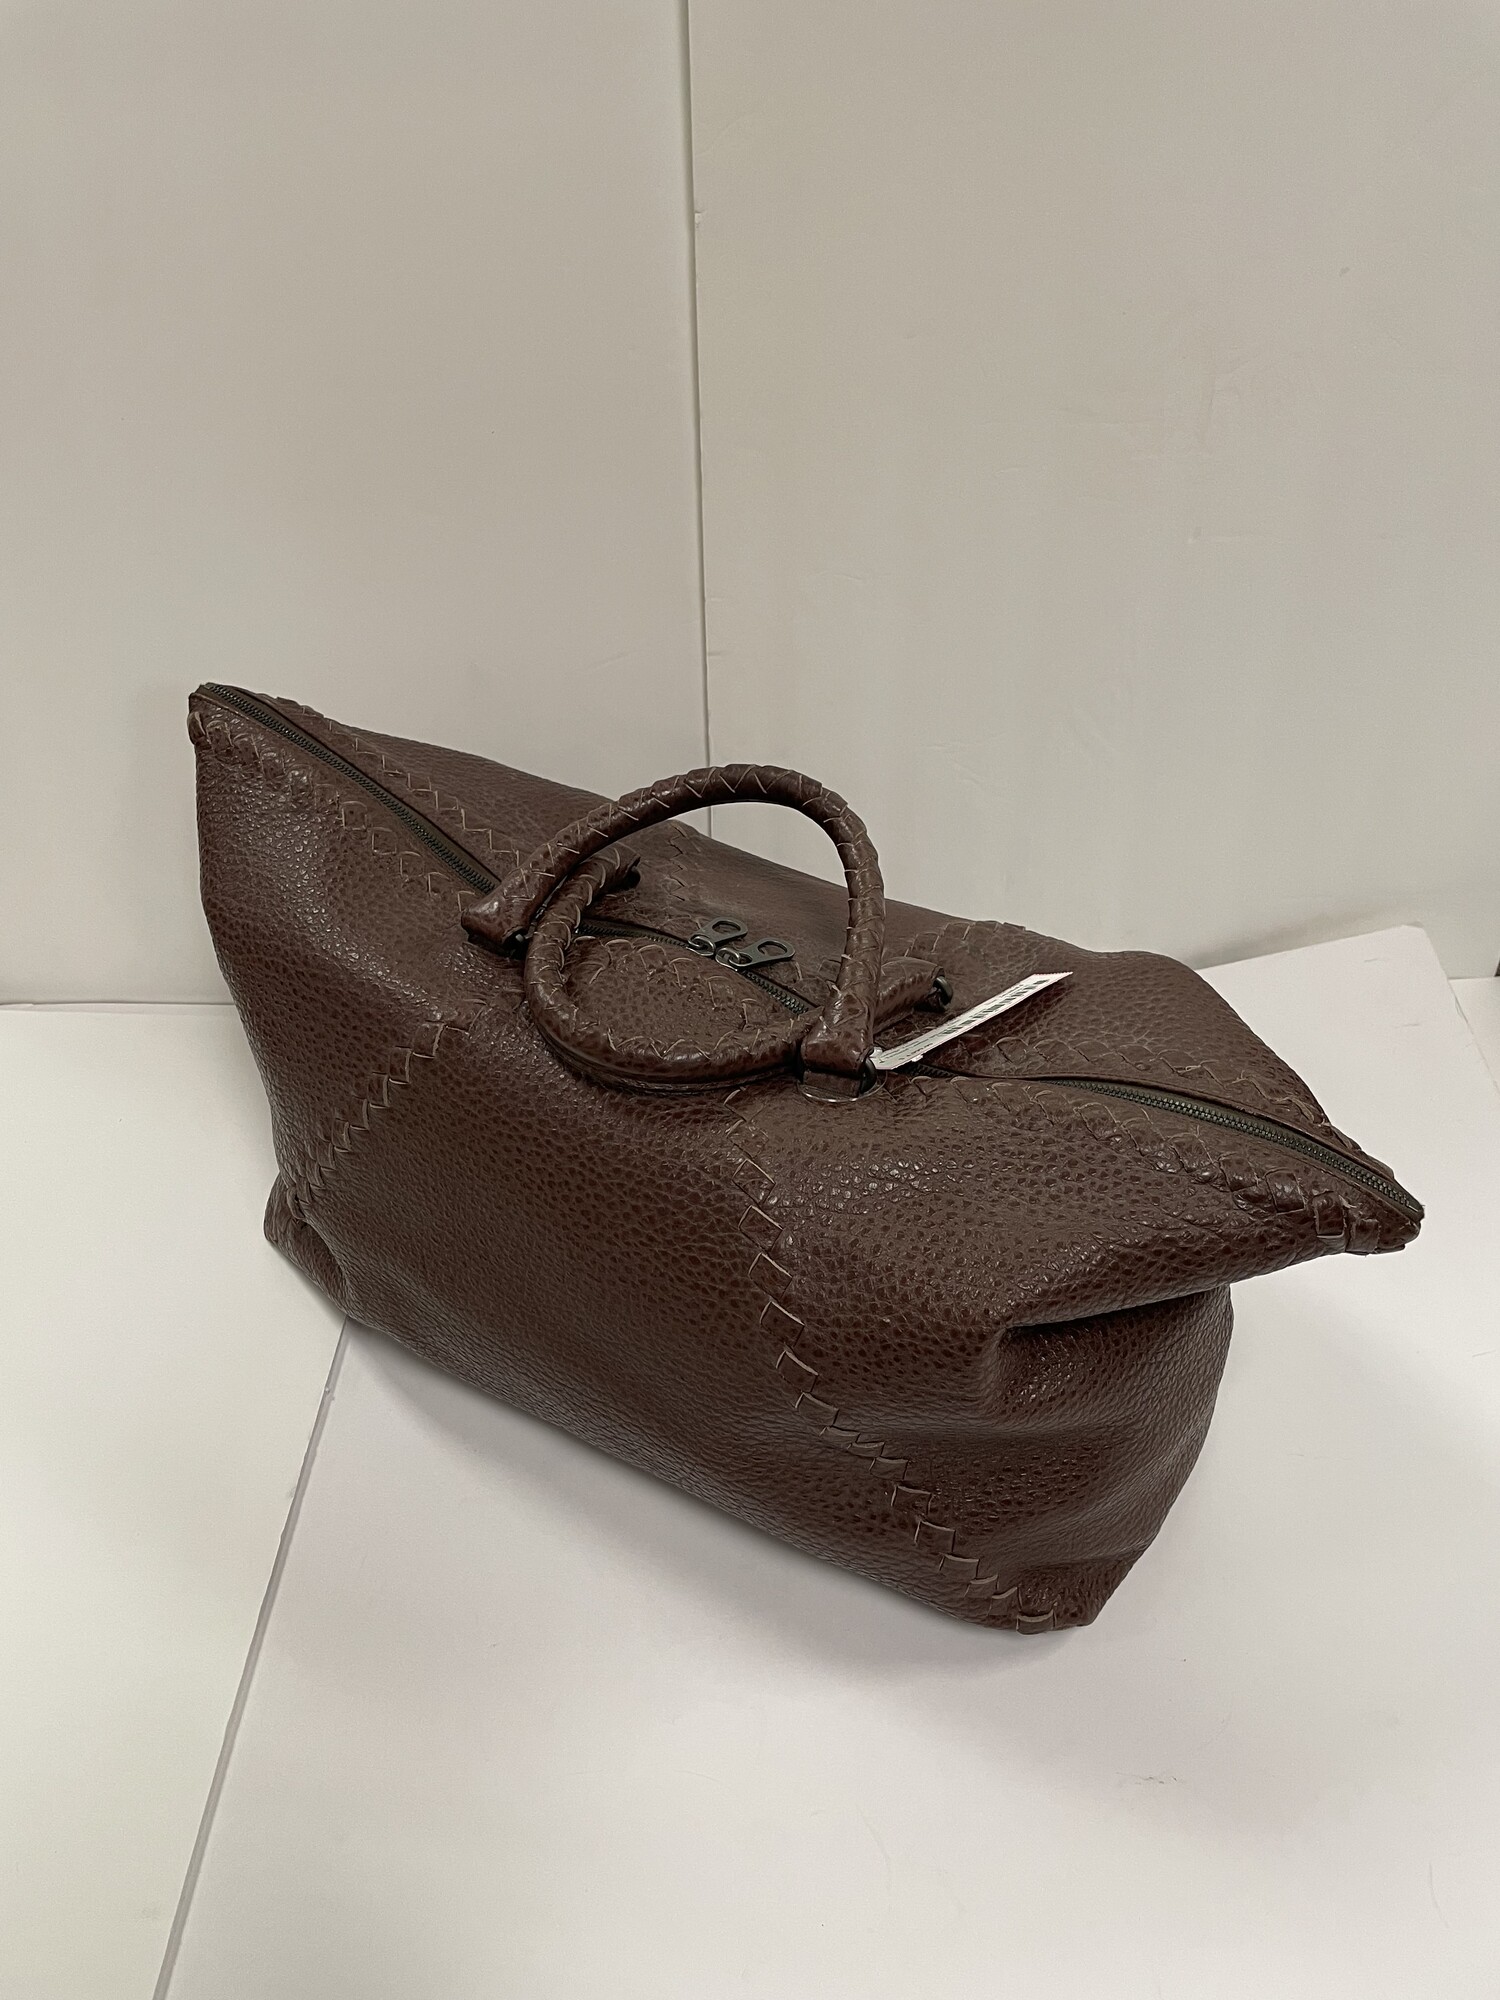 Bottega Veneta:  Textured Leather Weekend Bag, Chocolate, Size: 24 x 18 x 8.5 inches. Not to be fooled by its  Masculine look, this bag would made a beautiful addition to the travel styles of anyone.